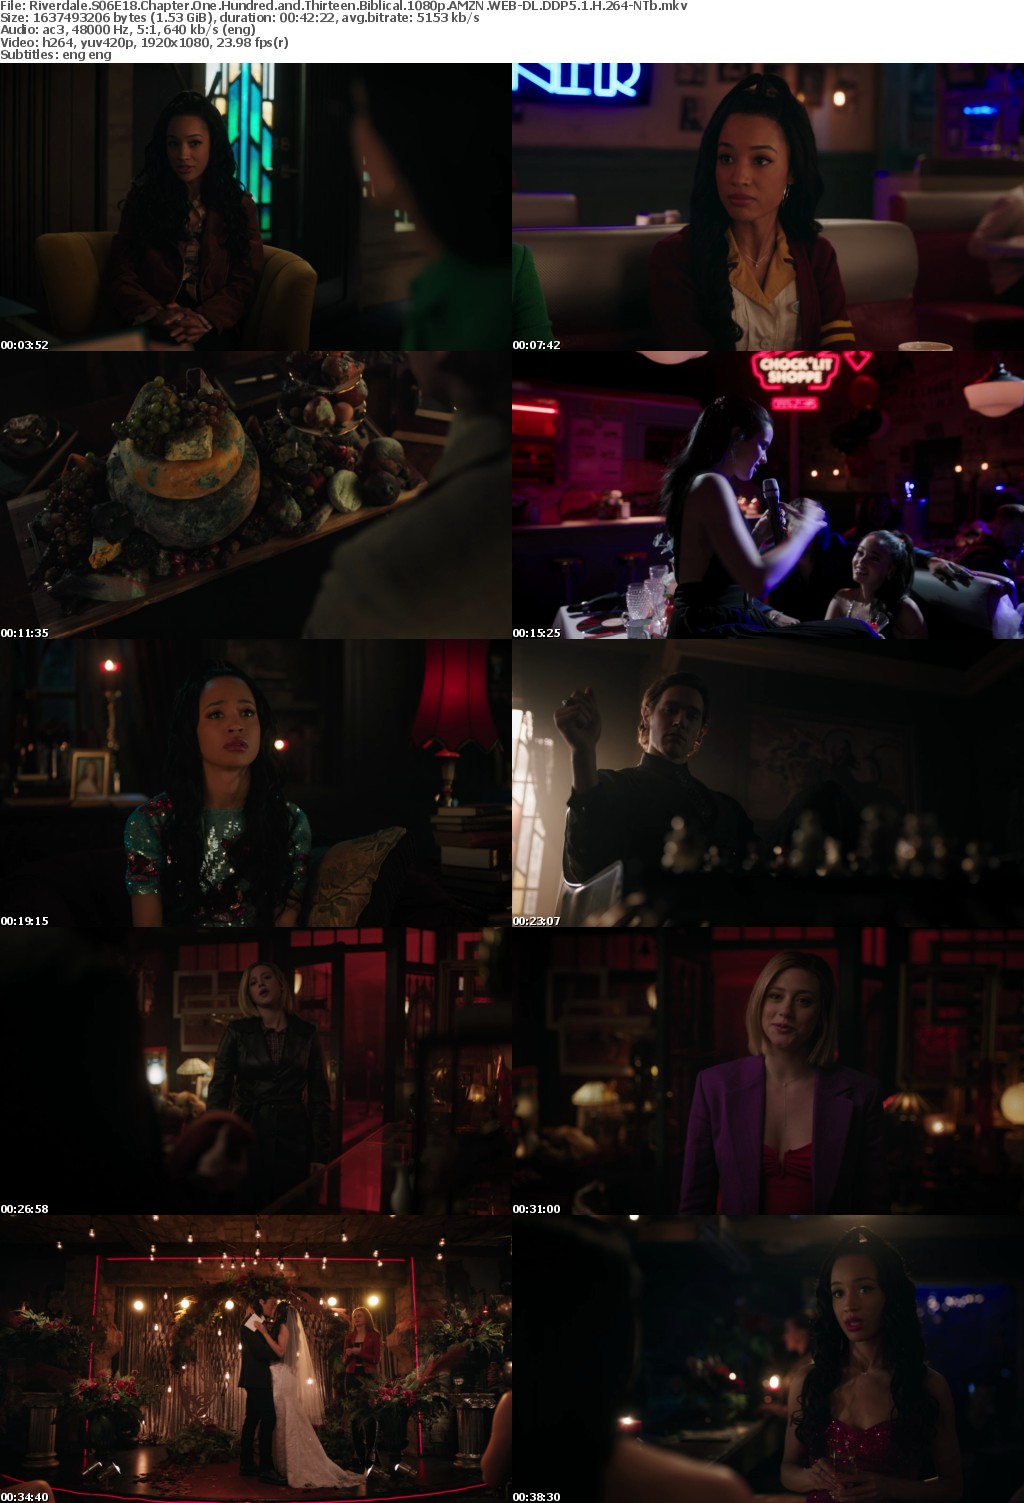 Riverdale US S06E18 Chapter One Hundred and Thirteen Biblical 1080p AMZN WEBRip DDP5 1 x264-NTb